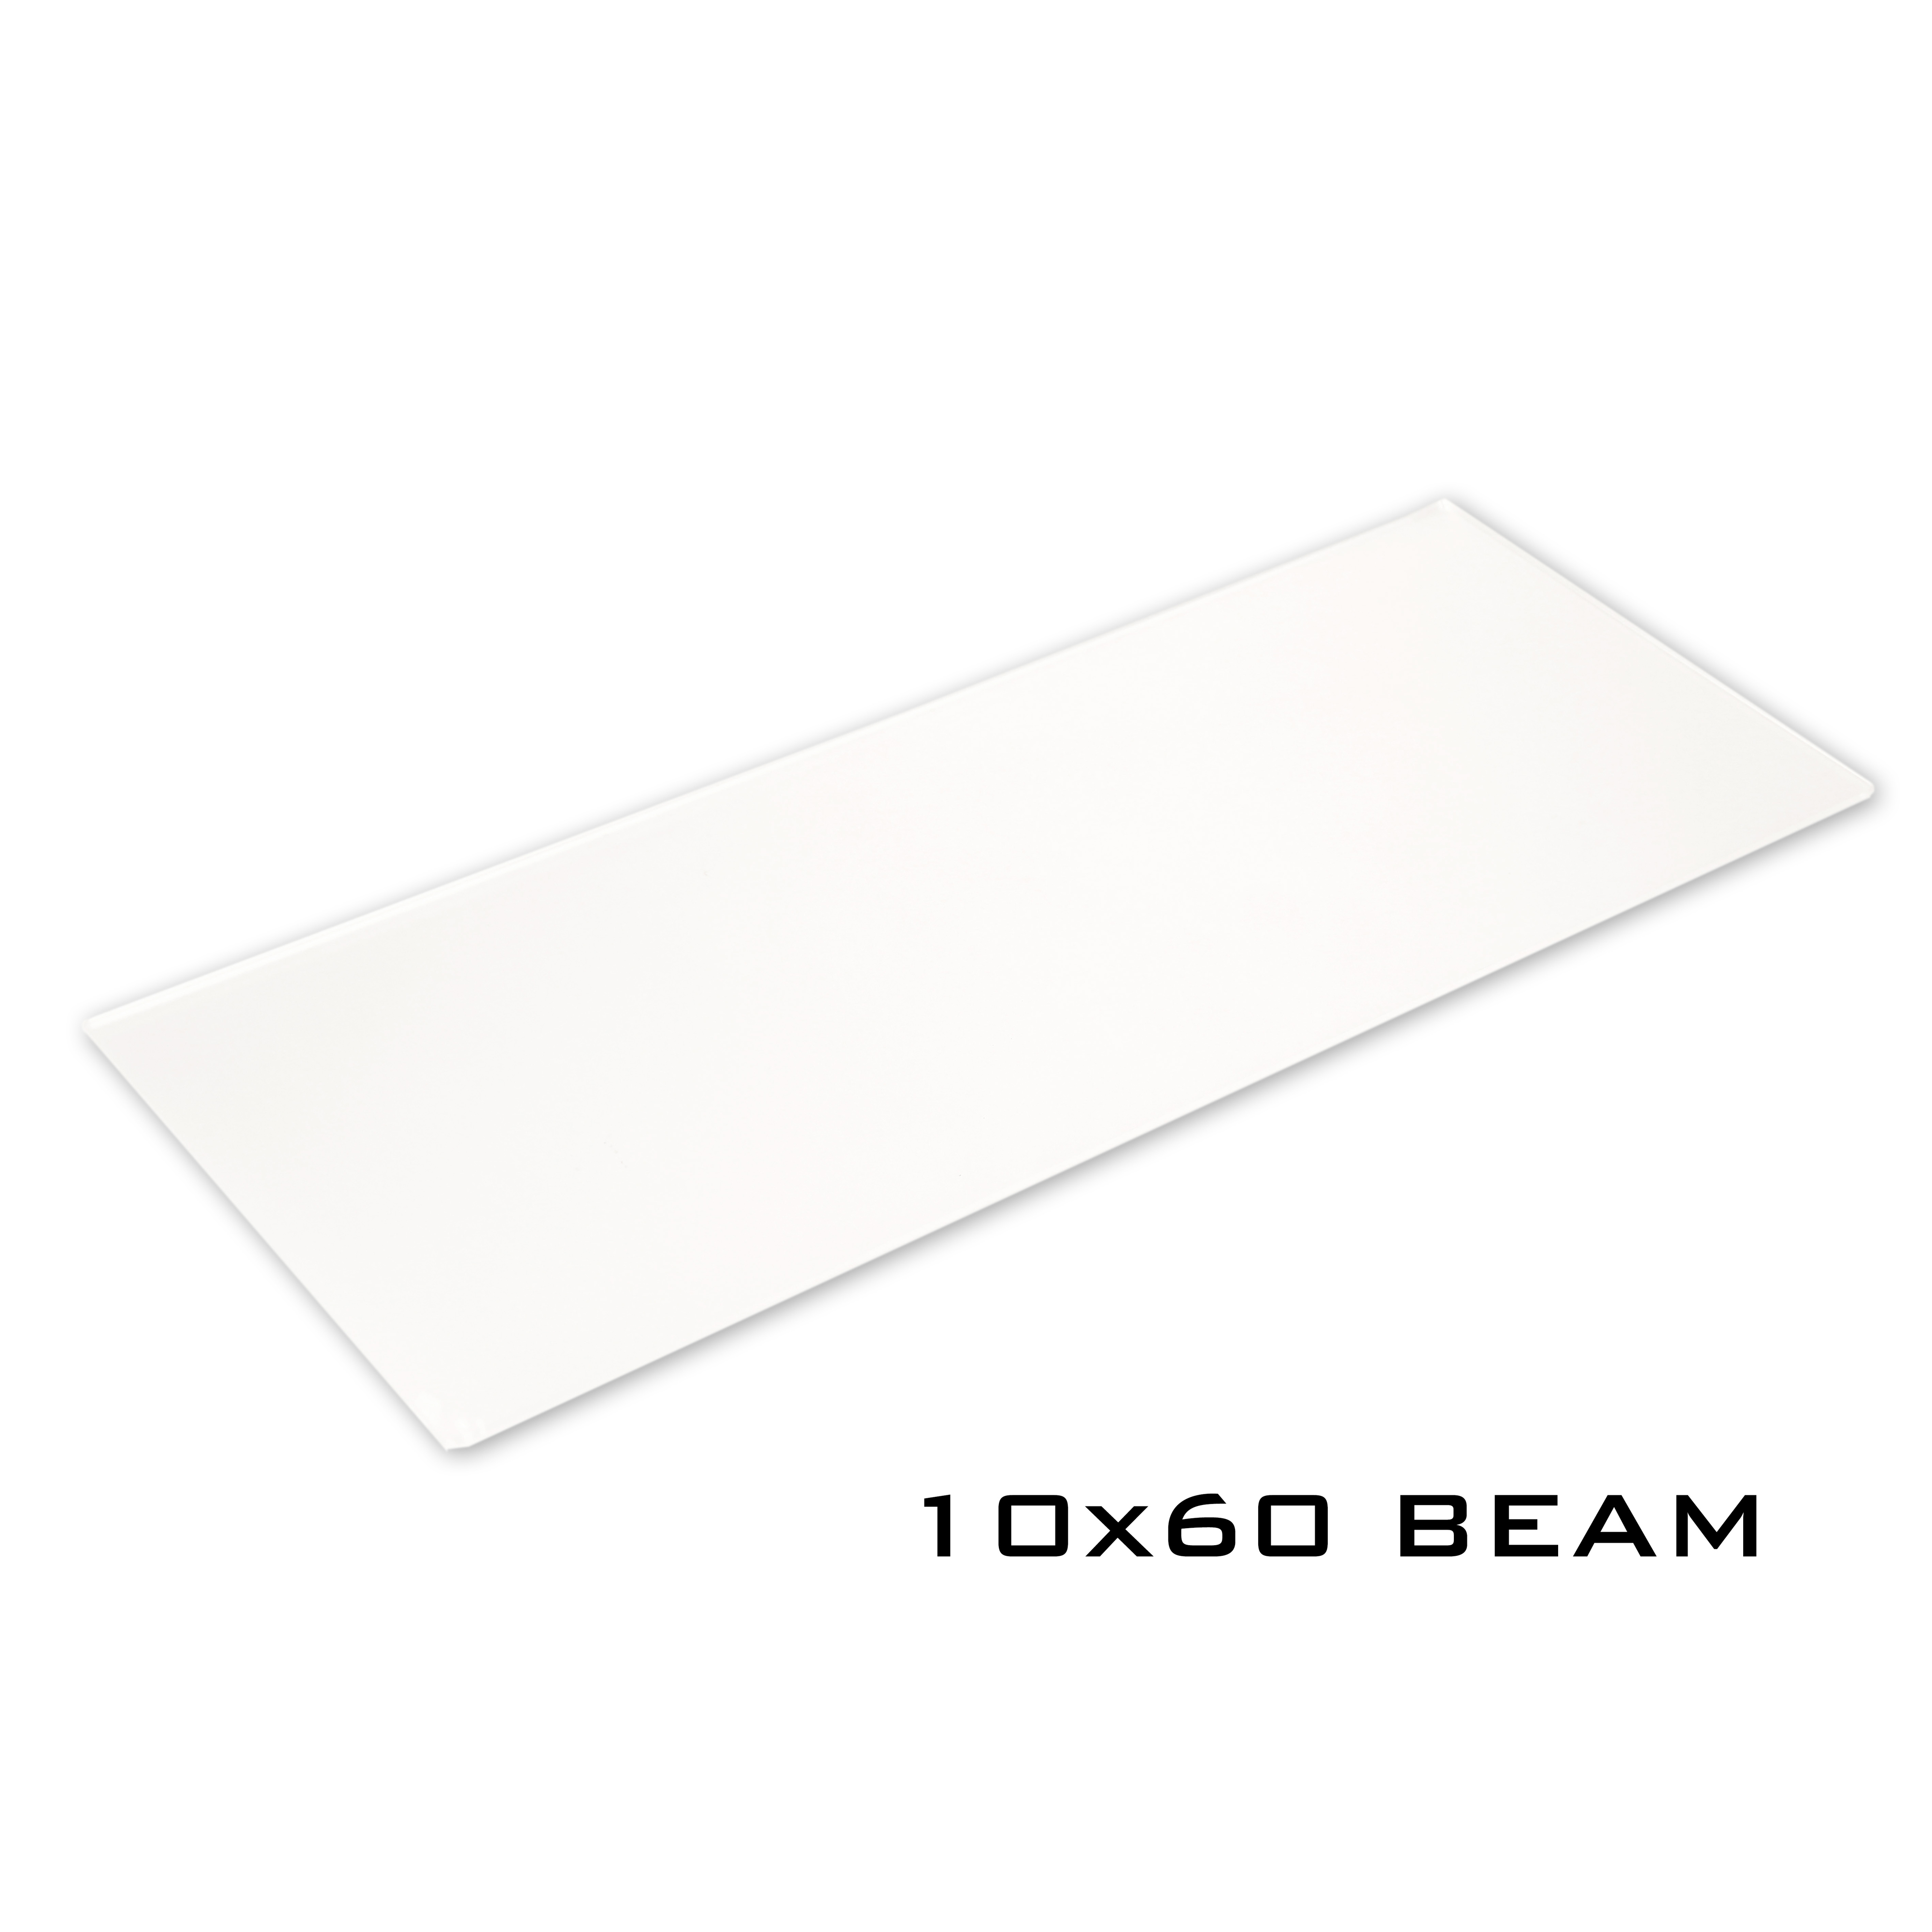 Beam shaper for BT-CHROMA 800: changes the standard beam to 10- horizontal x 60- vertical